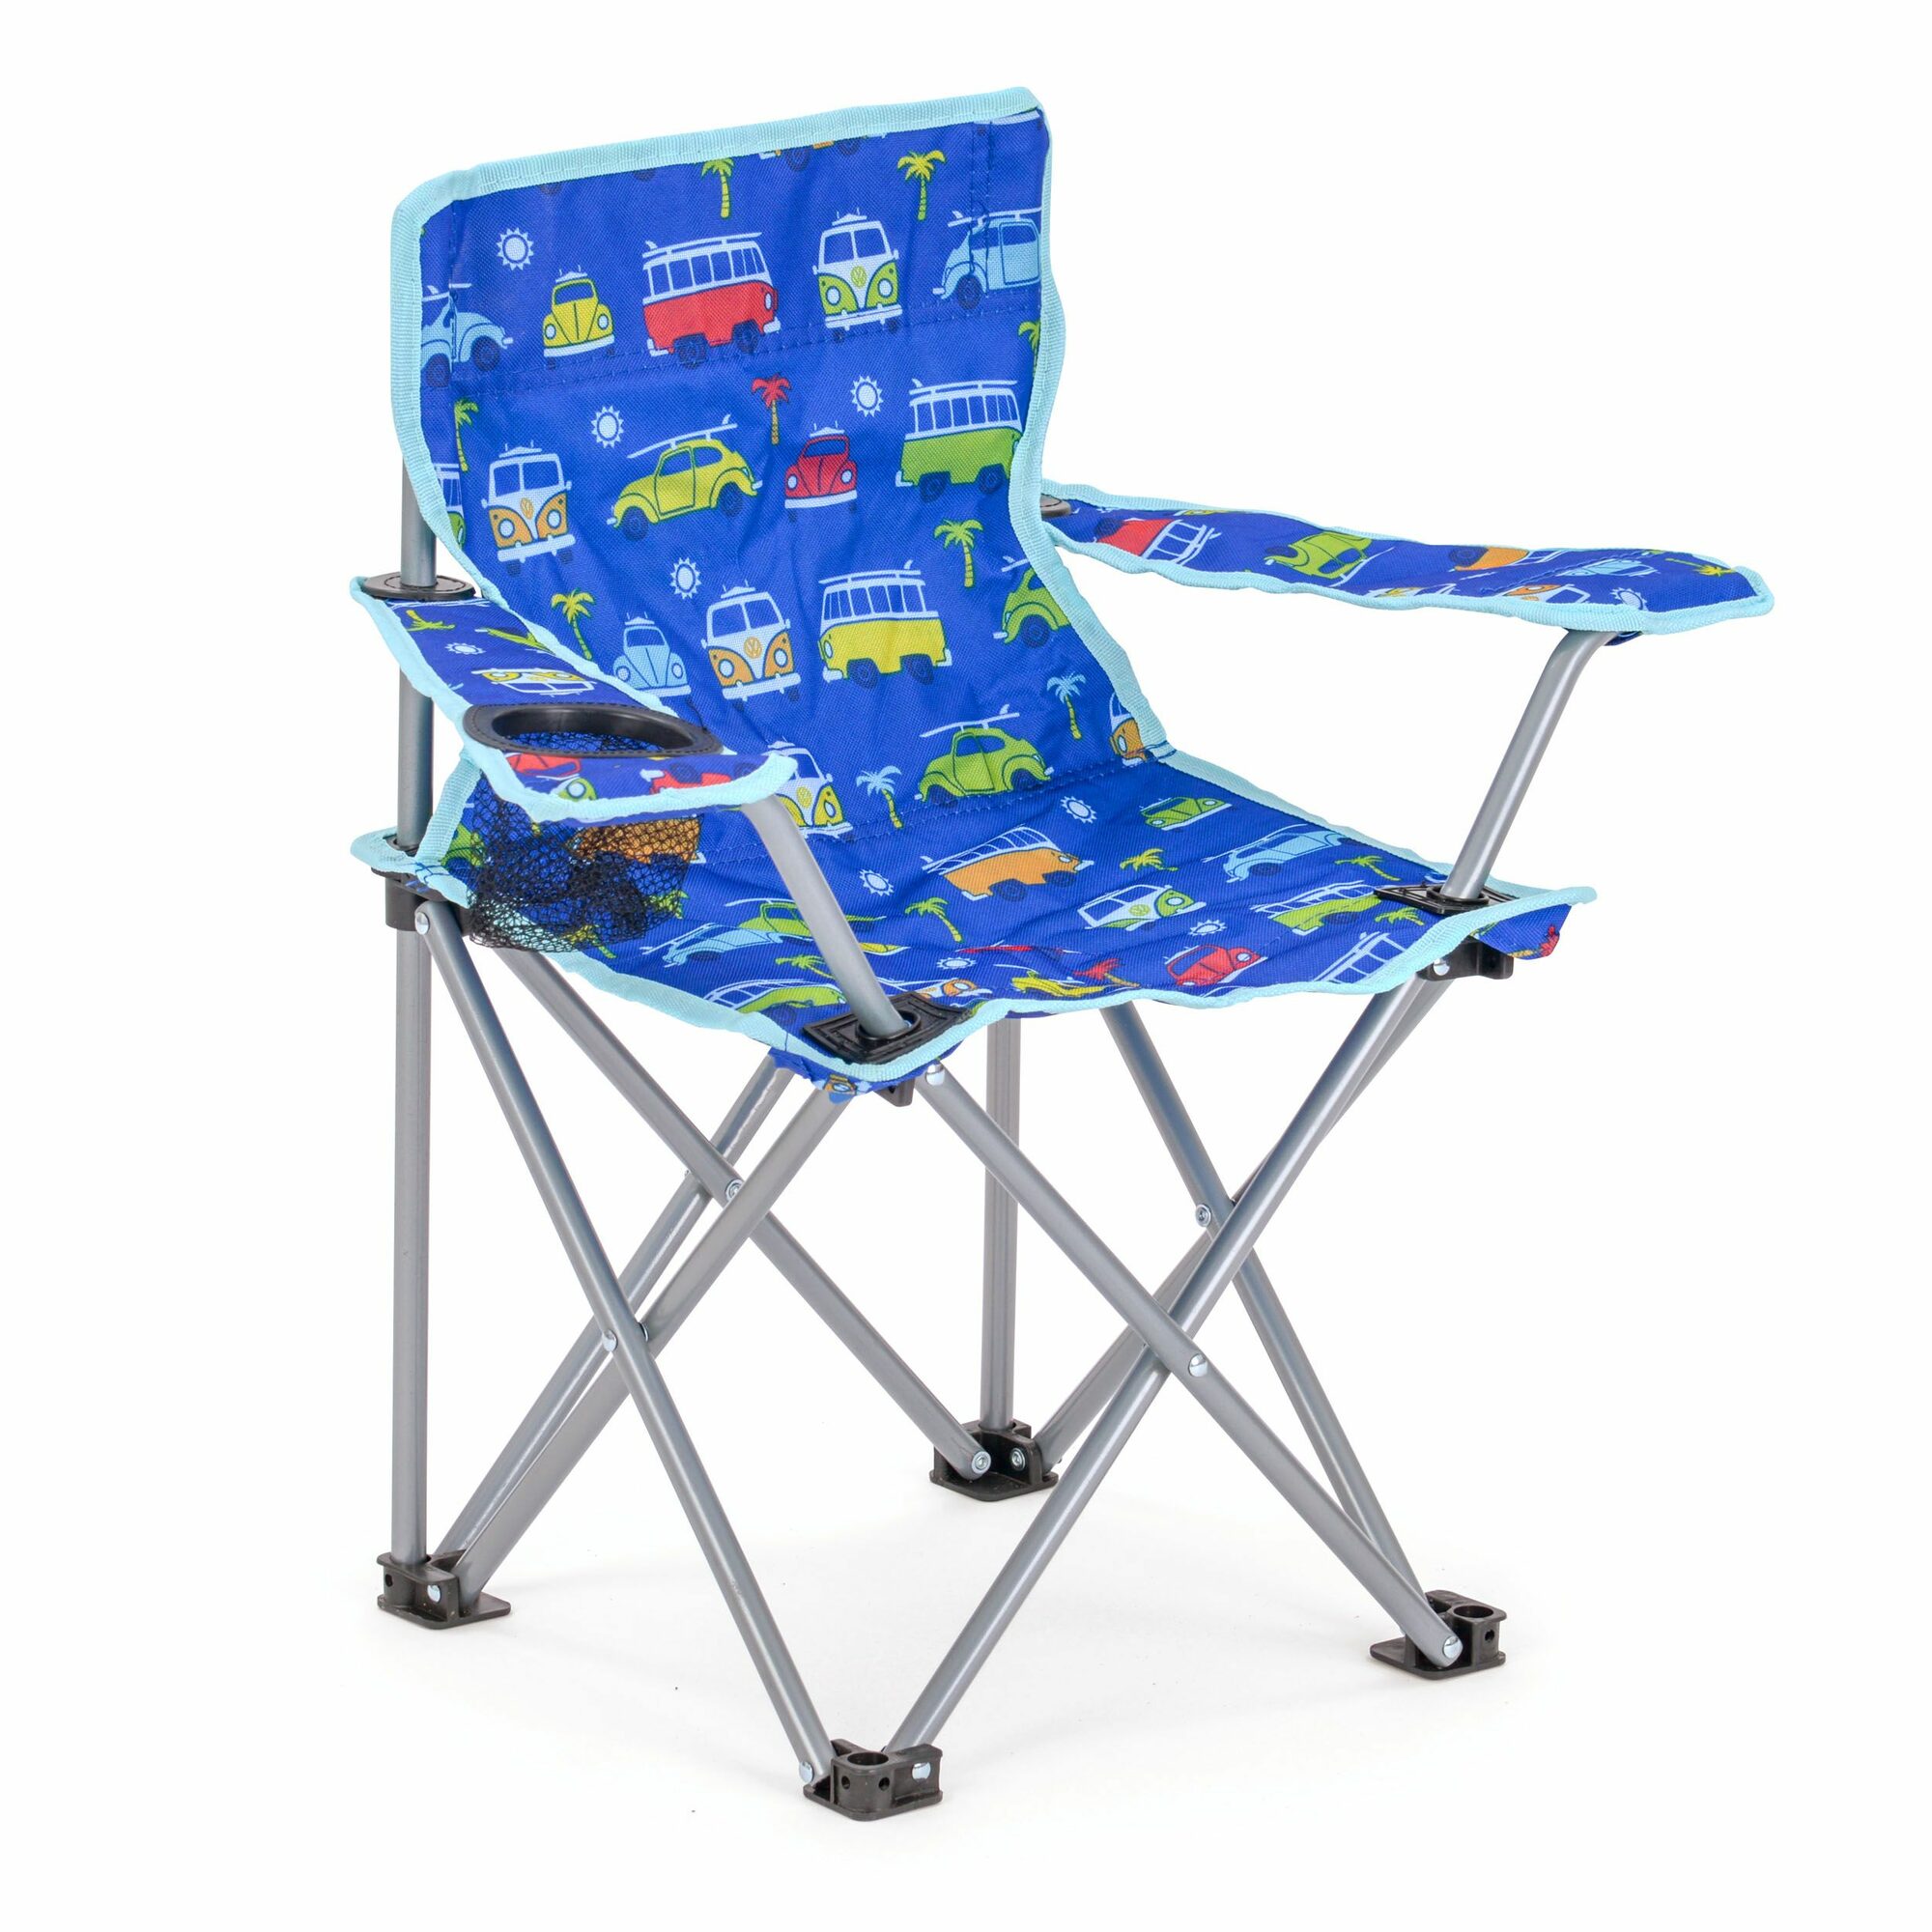 Kids VW Camping Chair